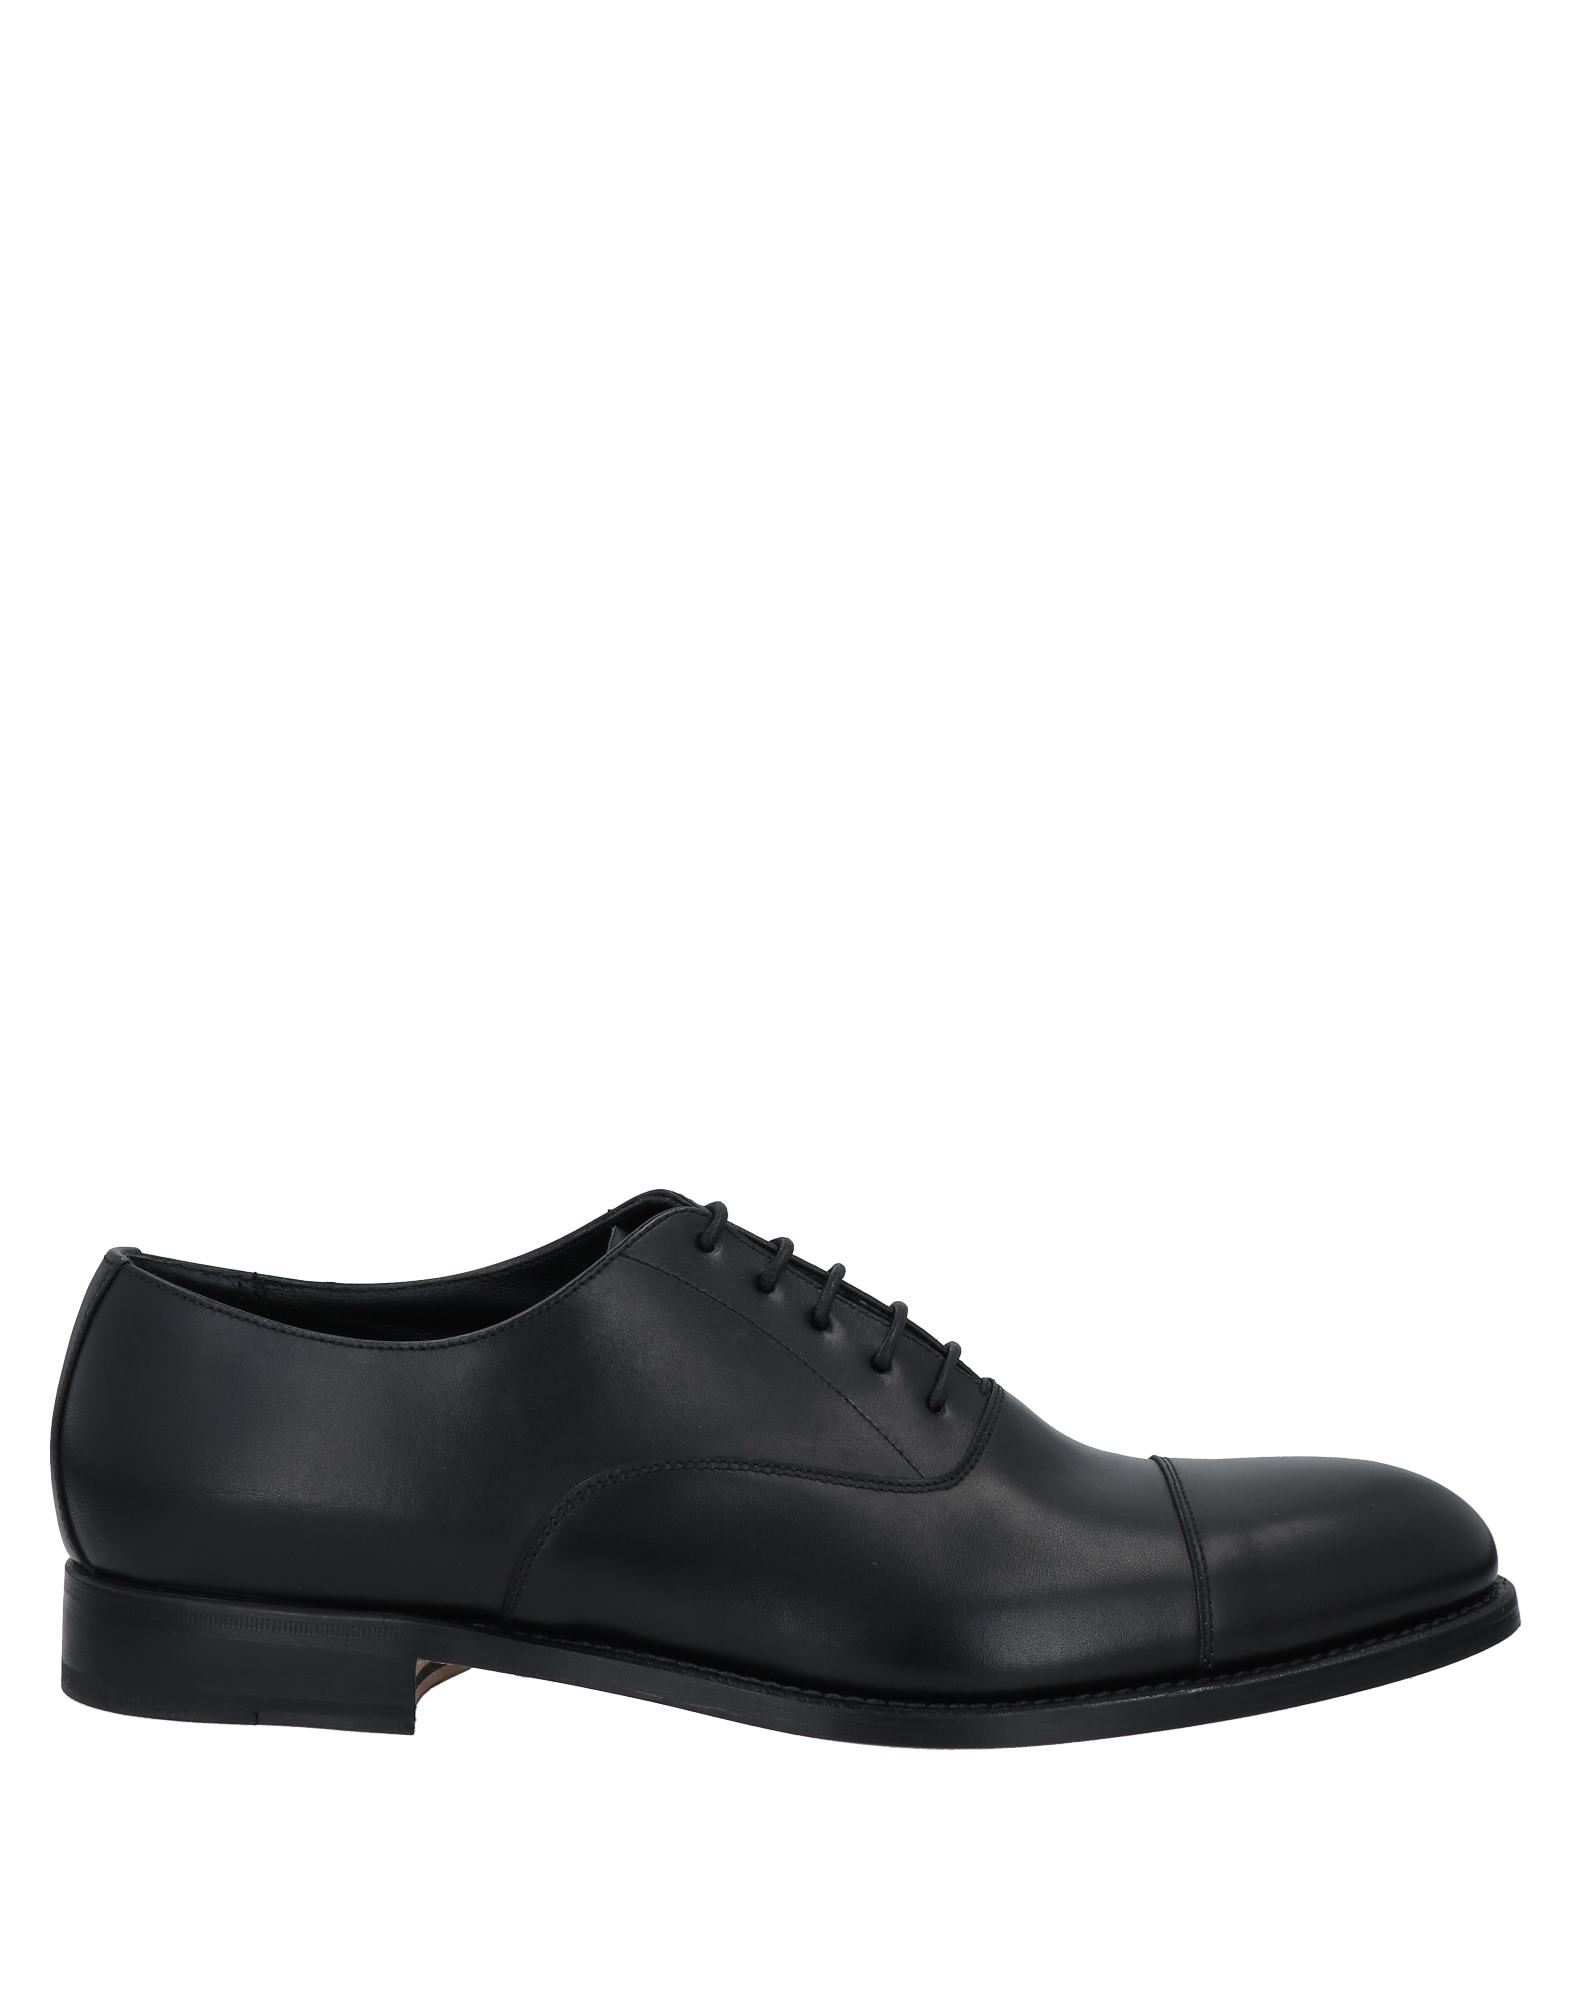 J. HOLBENS Lace-up shoes